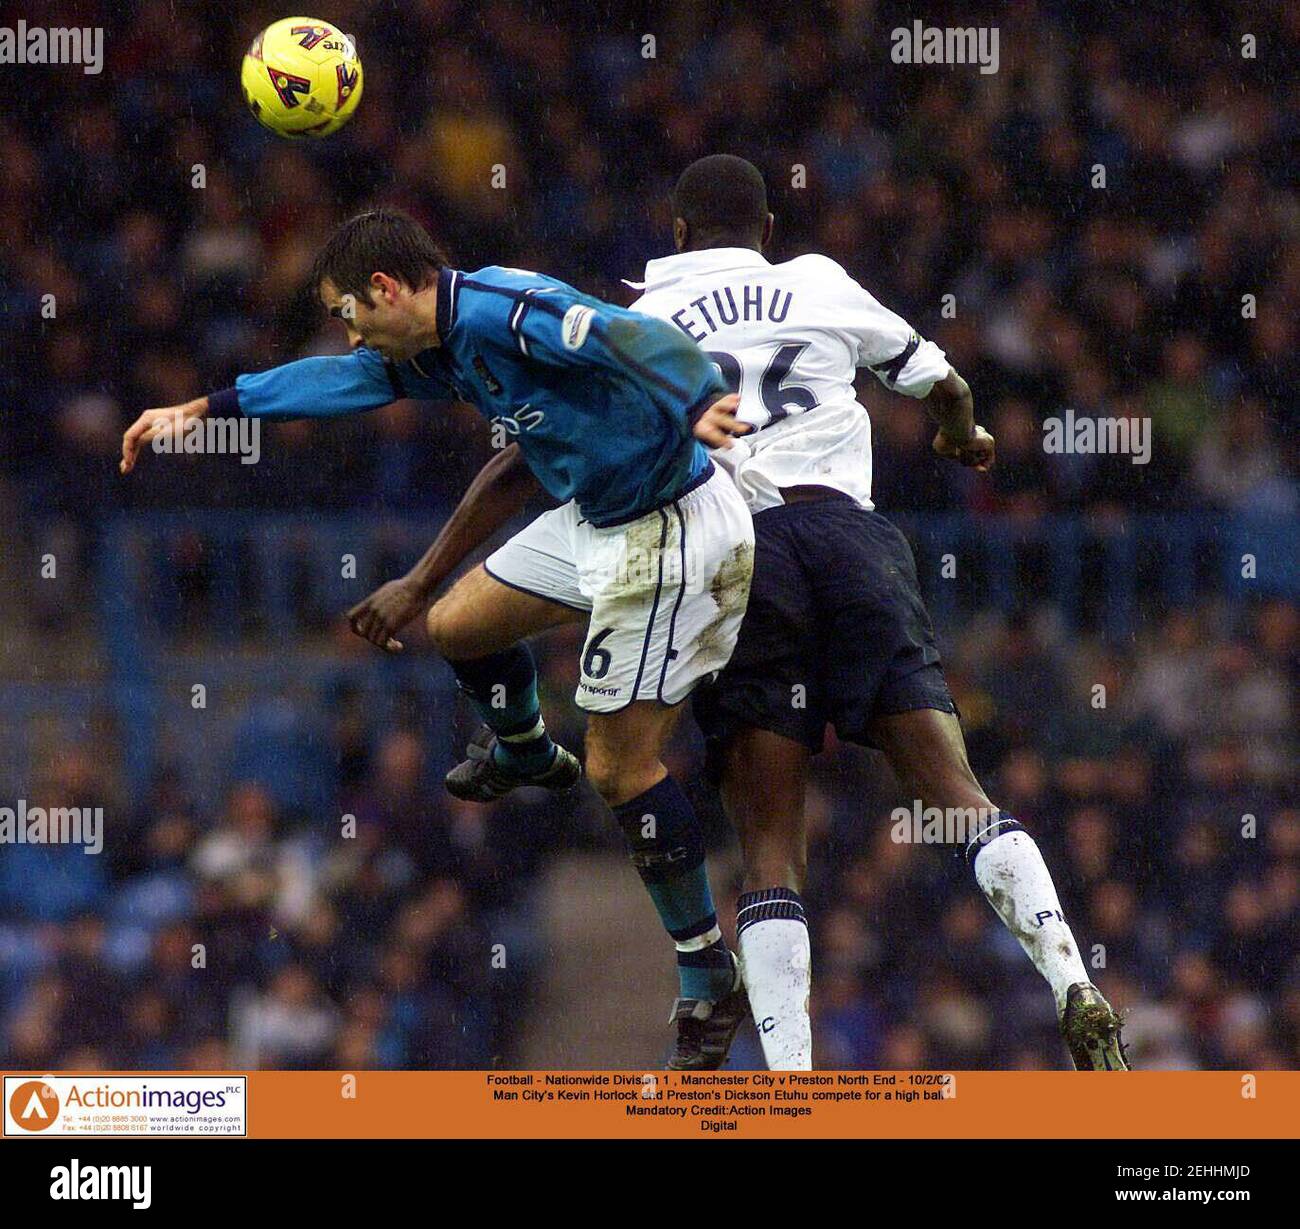 Football Nationwide Division 1 Manchester City V Preston North End 10 2 02 Man City S Kevin Horlock And Preston S Dickson Etuhu Compete For A High Ball Mandatory Credit Action Images Digital Stock Photo Alamy